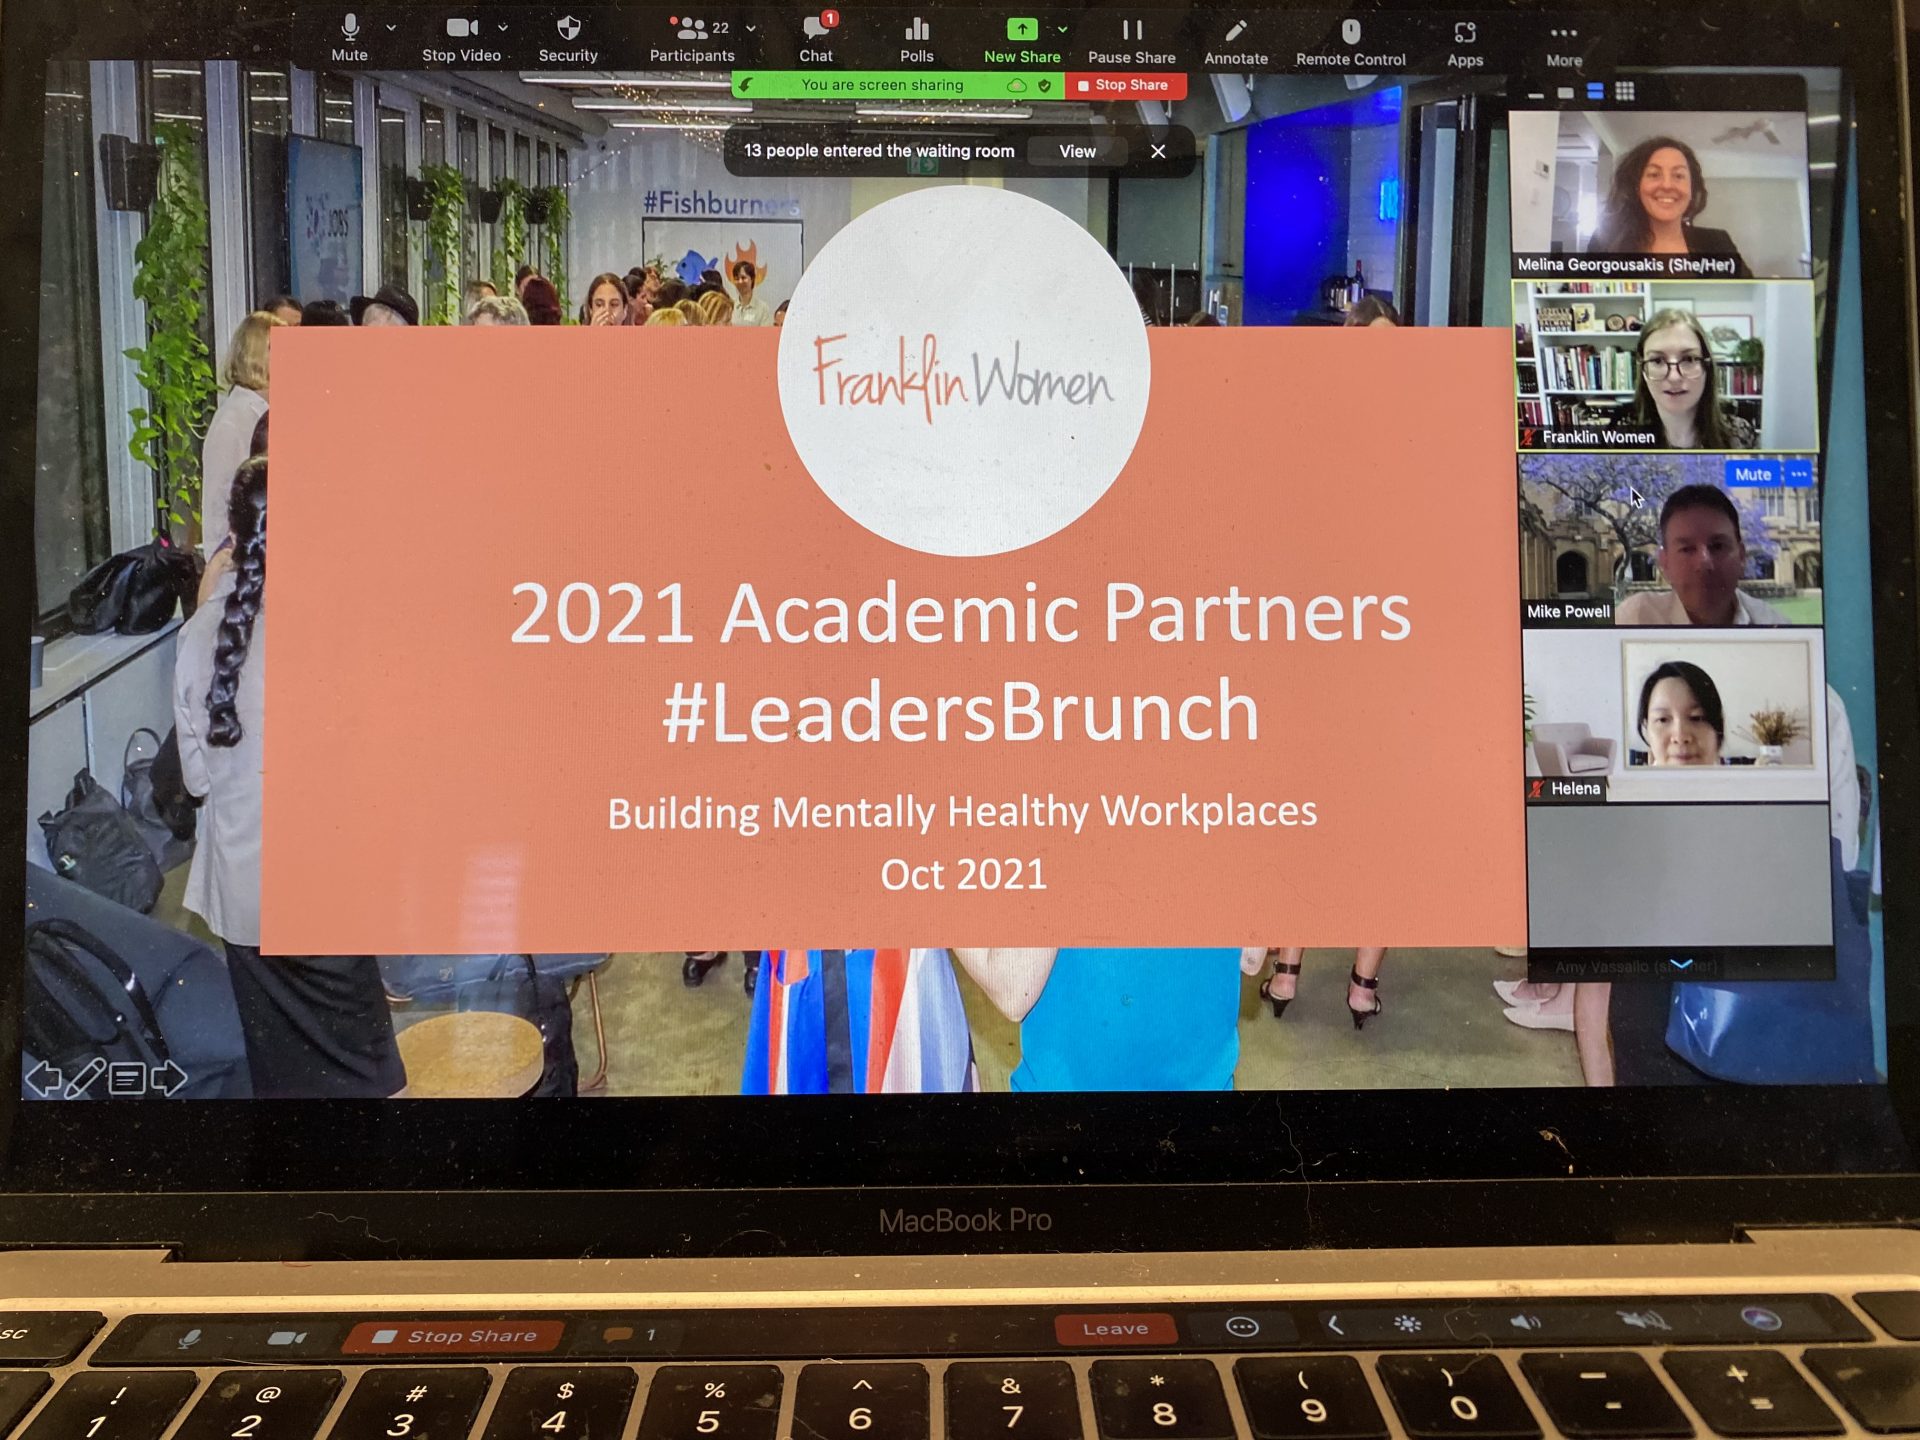 Laptop screen of Zoom event. Shared slides reads2021 Academic Partners #LeadersBrunch, Building Mentally Healthy Workplaces, October 2021. Videos of some participants are visible along the side of the screen.